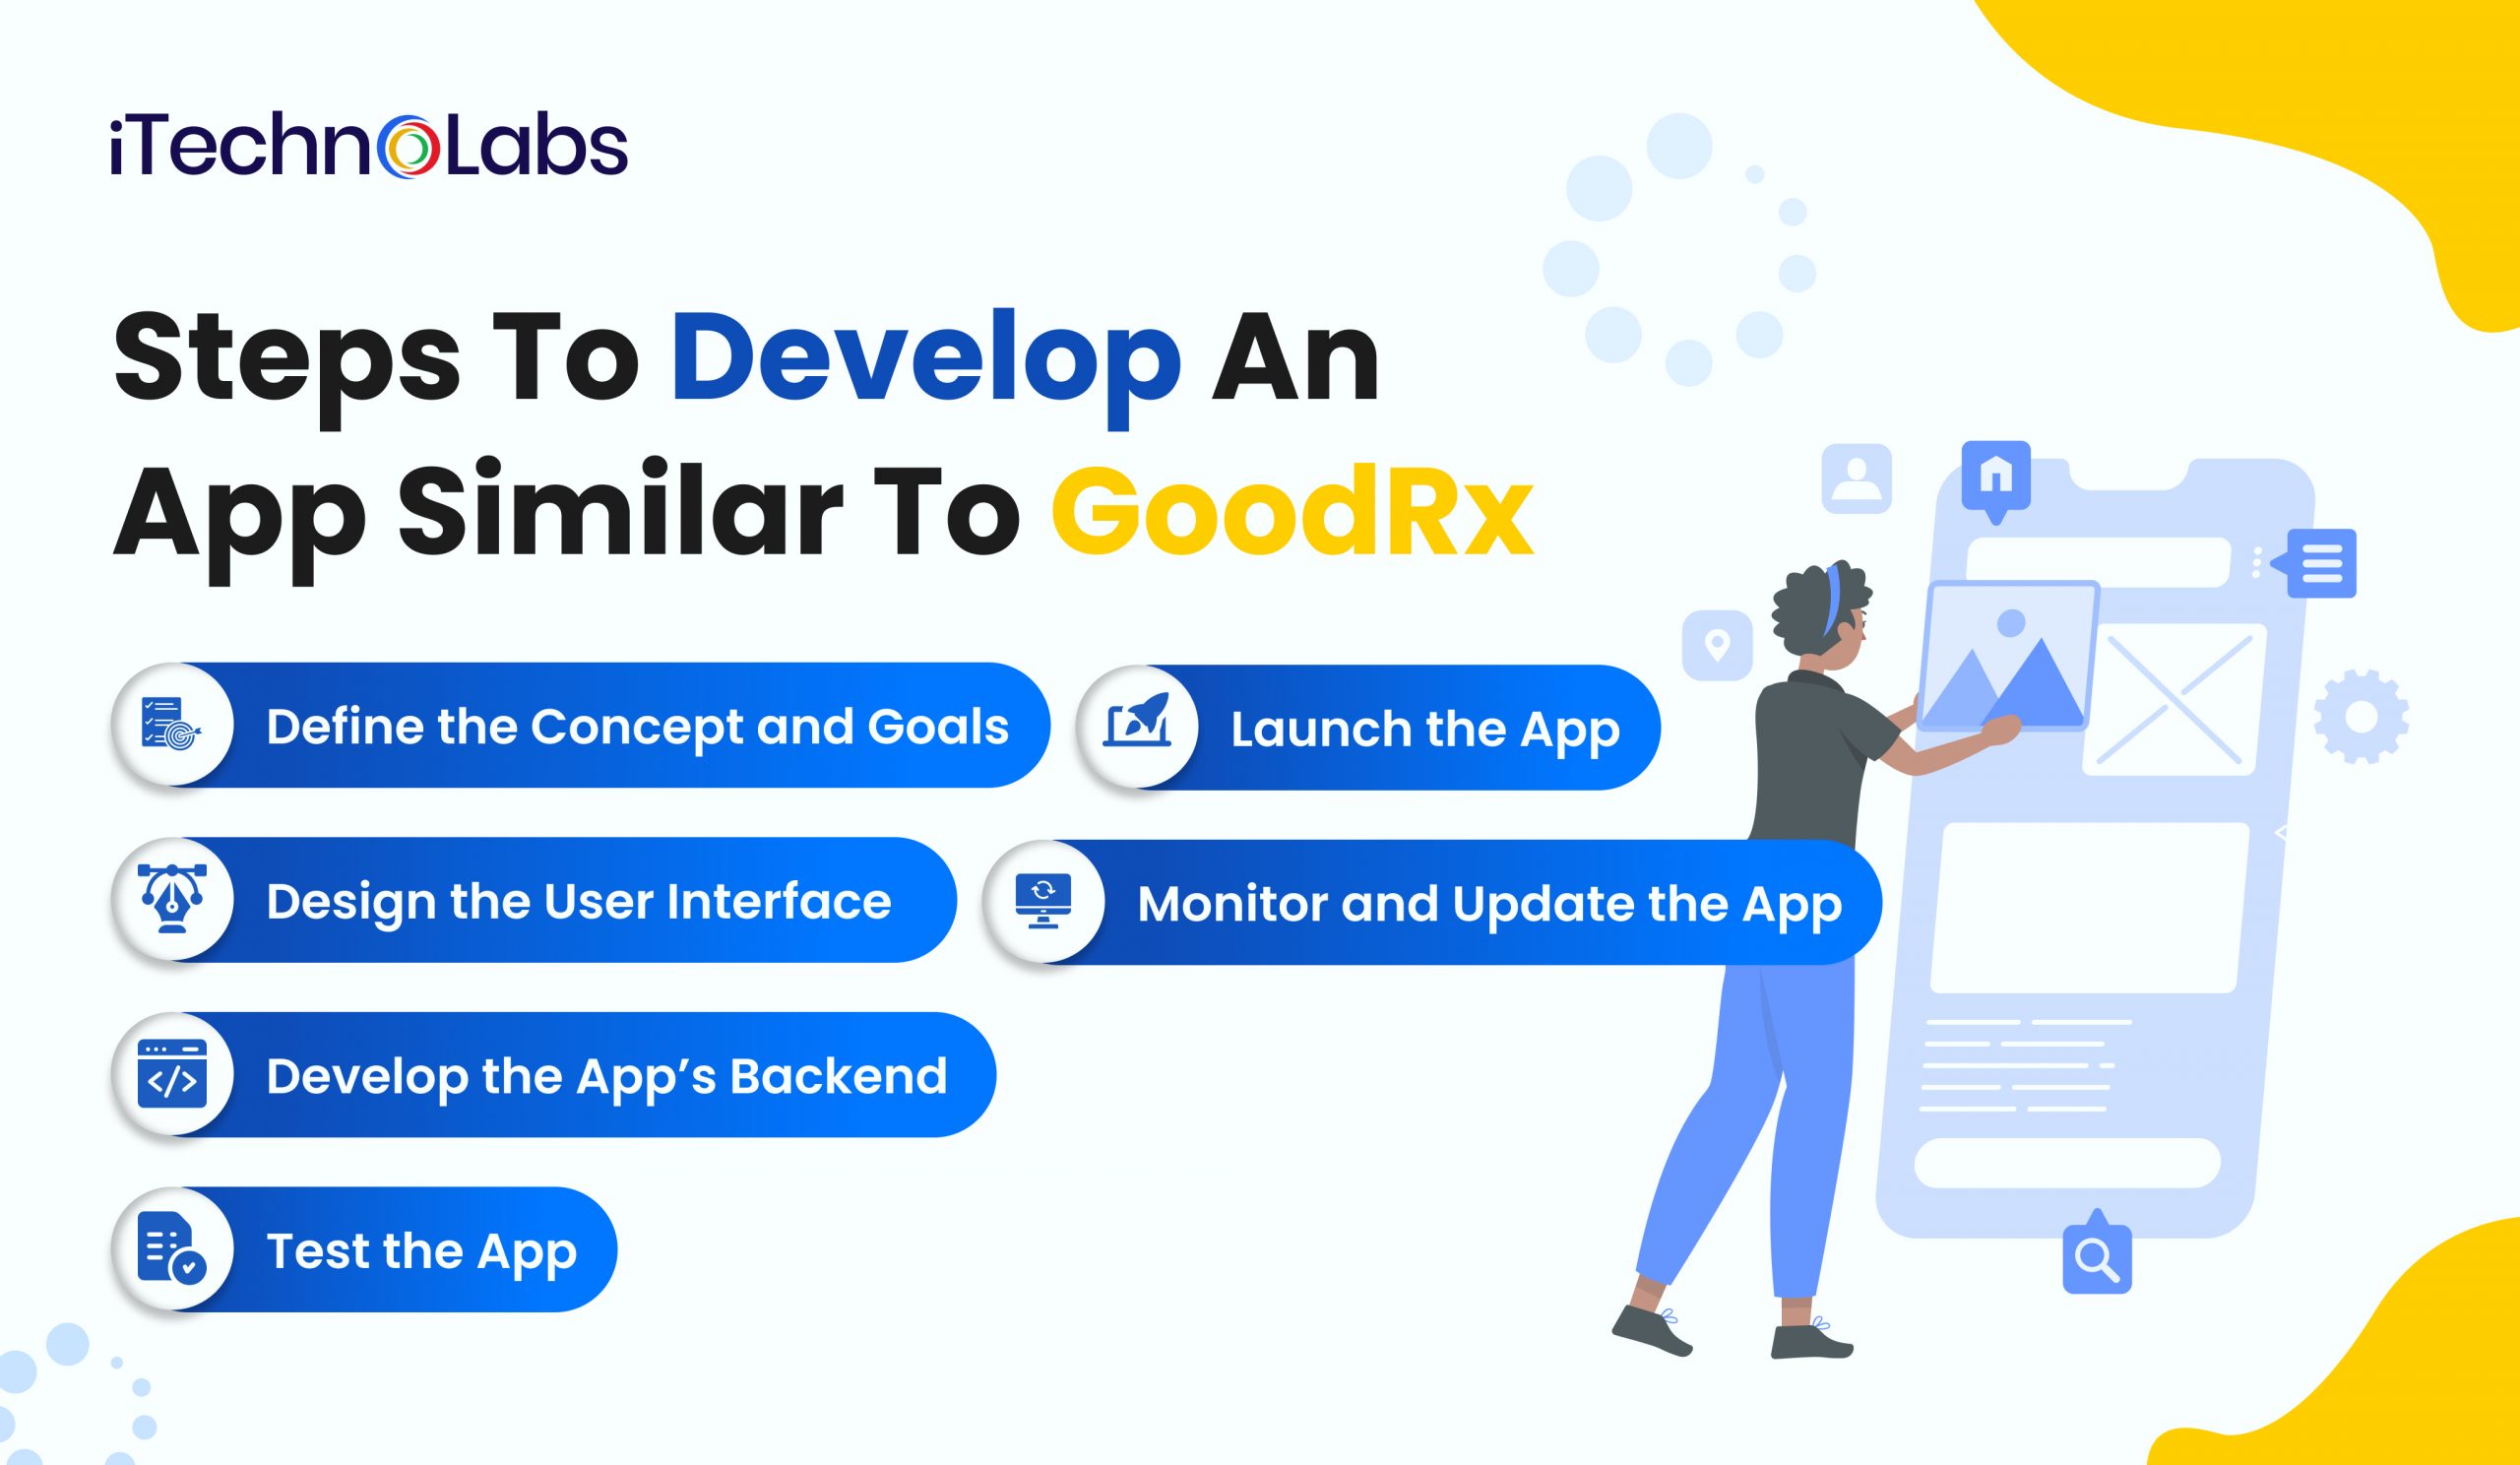 iTechnolabs-Steps to develop an App similar to GoodRx